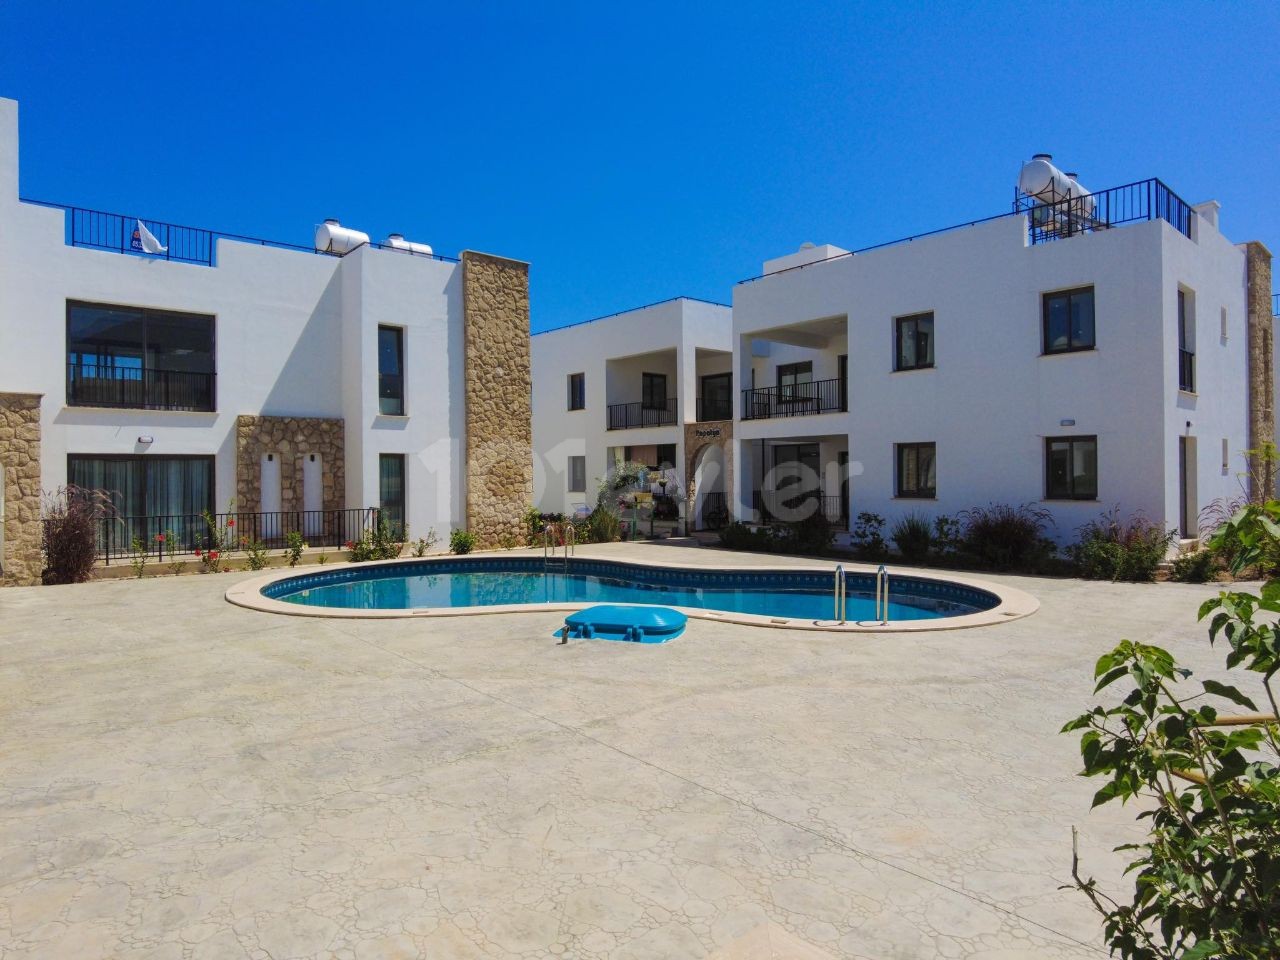 TOP FLOOR APARTMENT WITH 2 + 1 PRIVATE TERRACE WITH AN OPPORTUNITY PRICE OF 100 M2 IN KYRENIA OLIVE GROVE, CYPRUS ** 